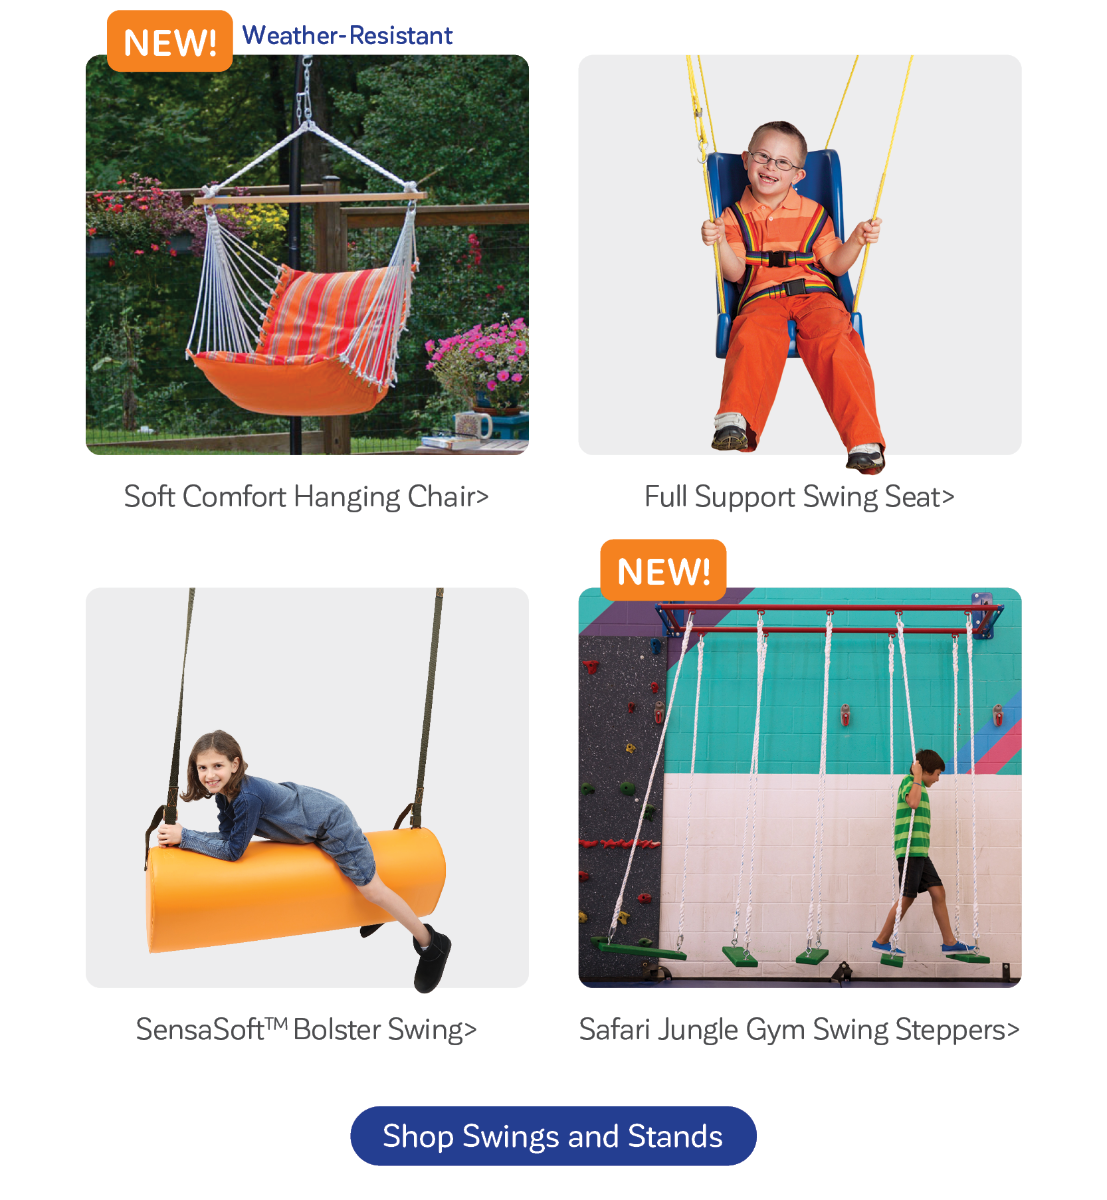 Enjoy the Benefits of Swinging...for All Ages!